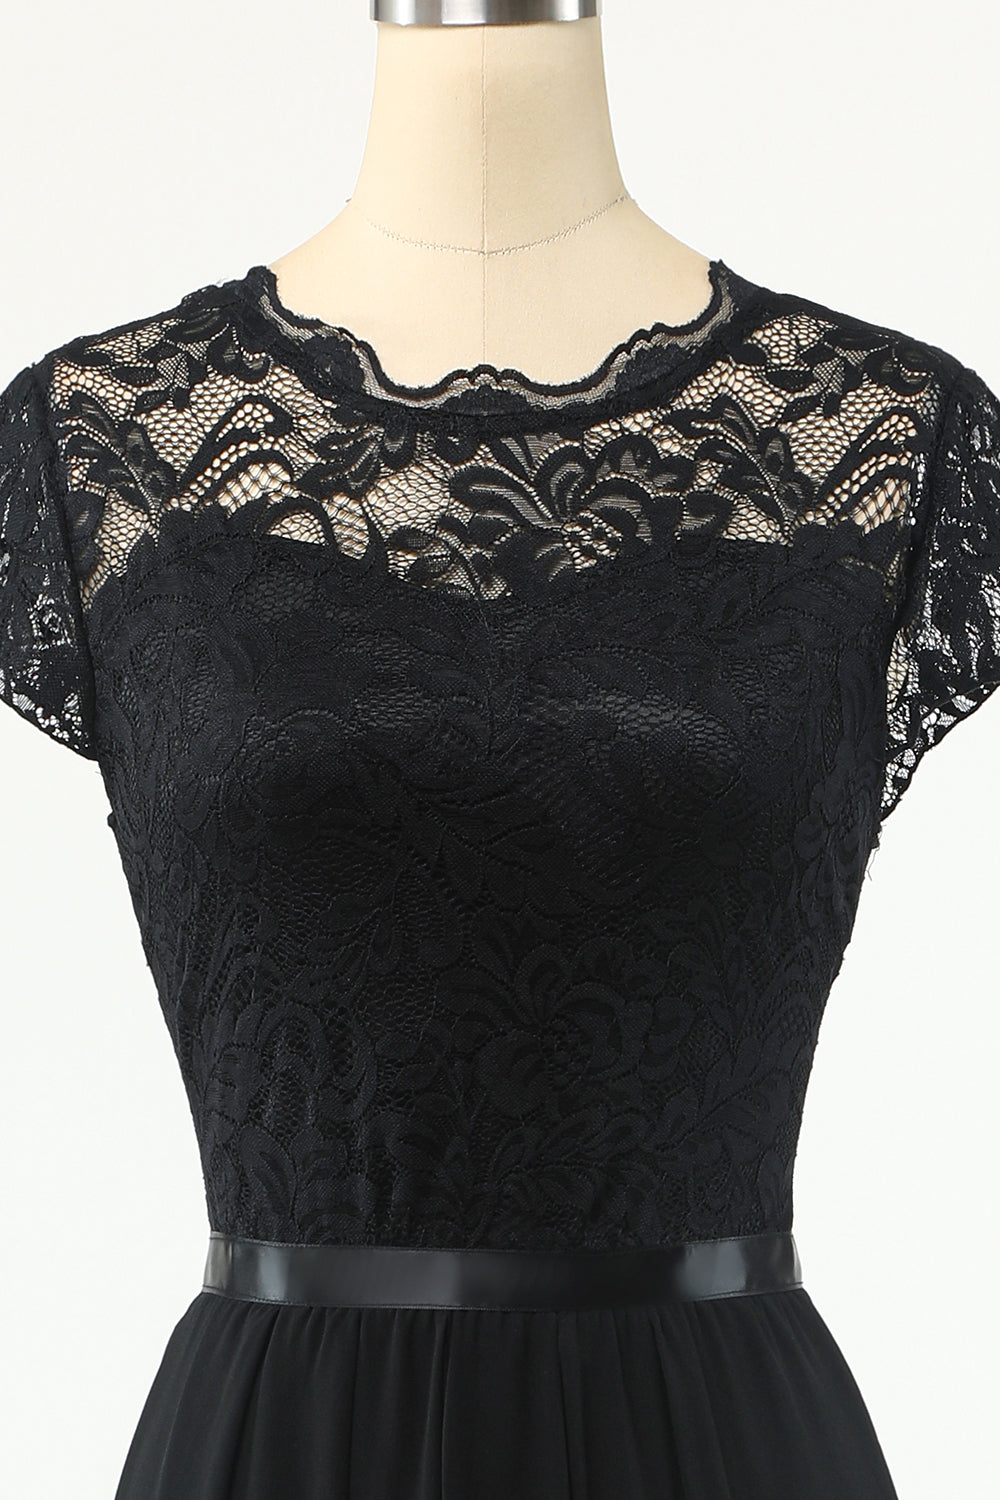 Formals Dresses Long, Classic A Line Black Party Dress with Lace